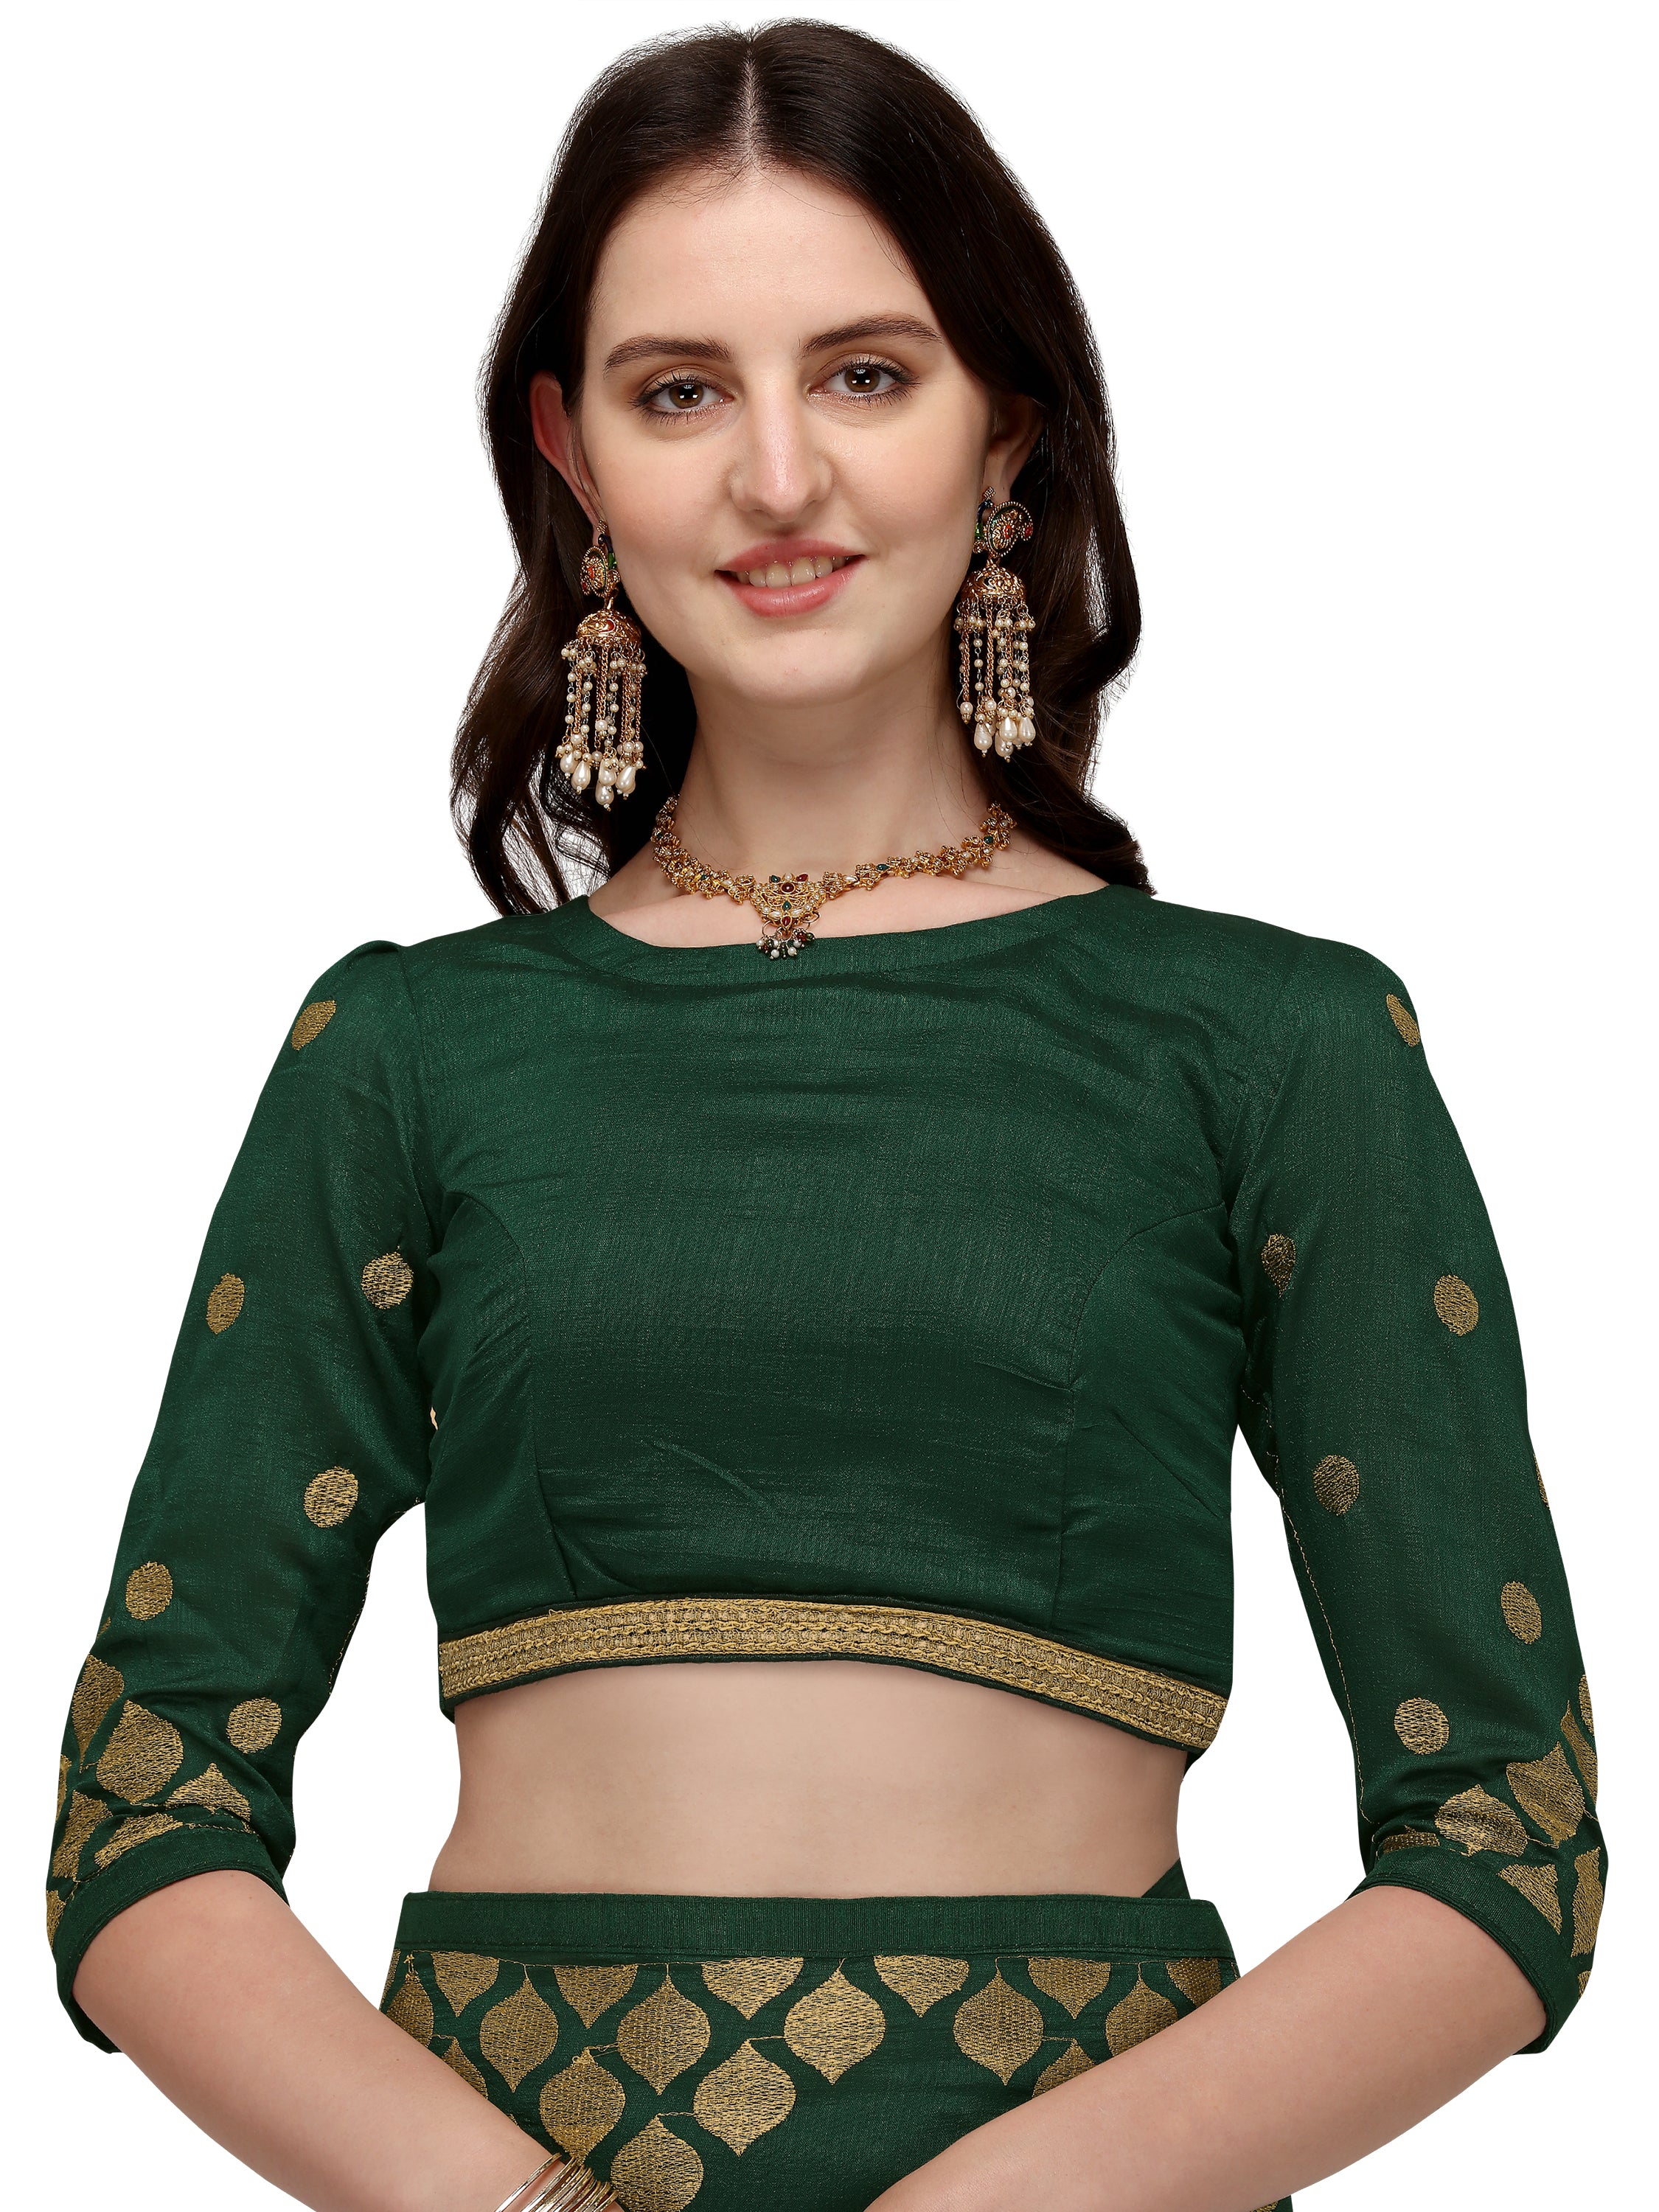 Women's Zari Embroided Paty Wear Traditional Silk Blend Saree With Blouse Piece (Green) - NIMIDHYA